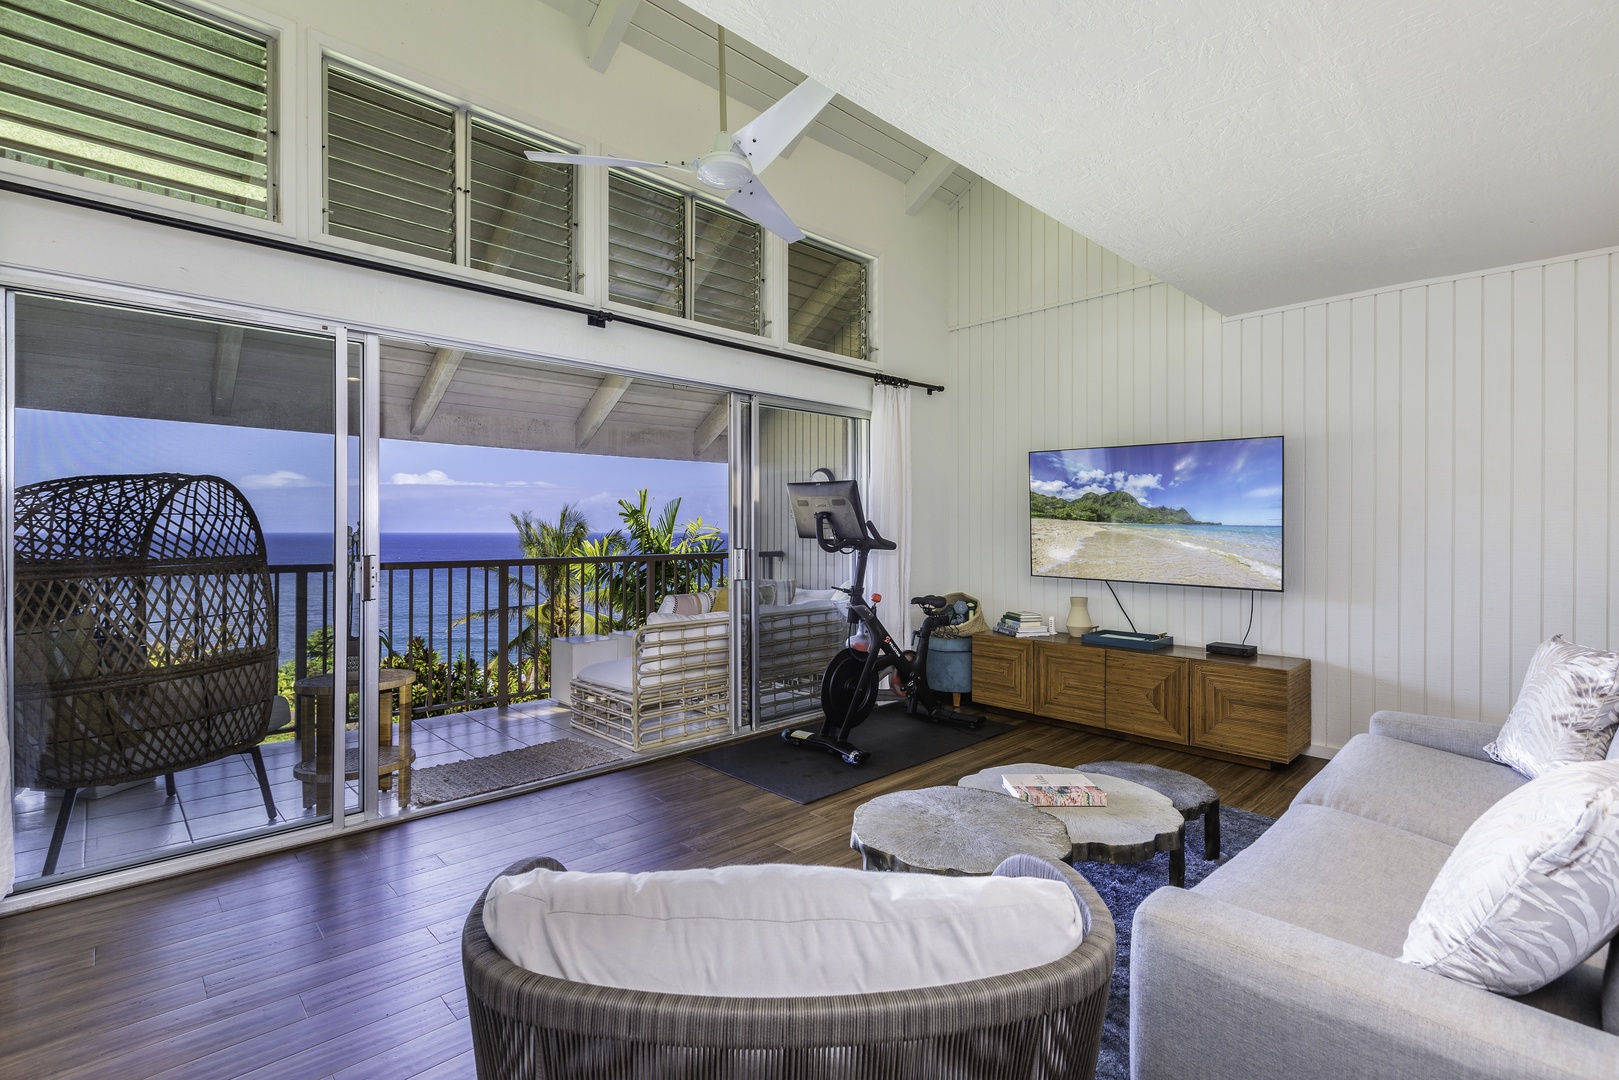 Princeville Vacation Rentals, Pali Ke Kua 207 - In the living room, you are greeted with a cozy sleeper sofa, tasteful Hawaiian artwork and a large flat screen TV.